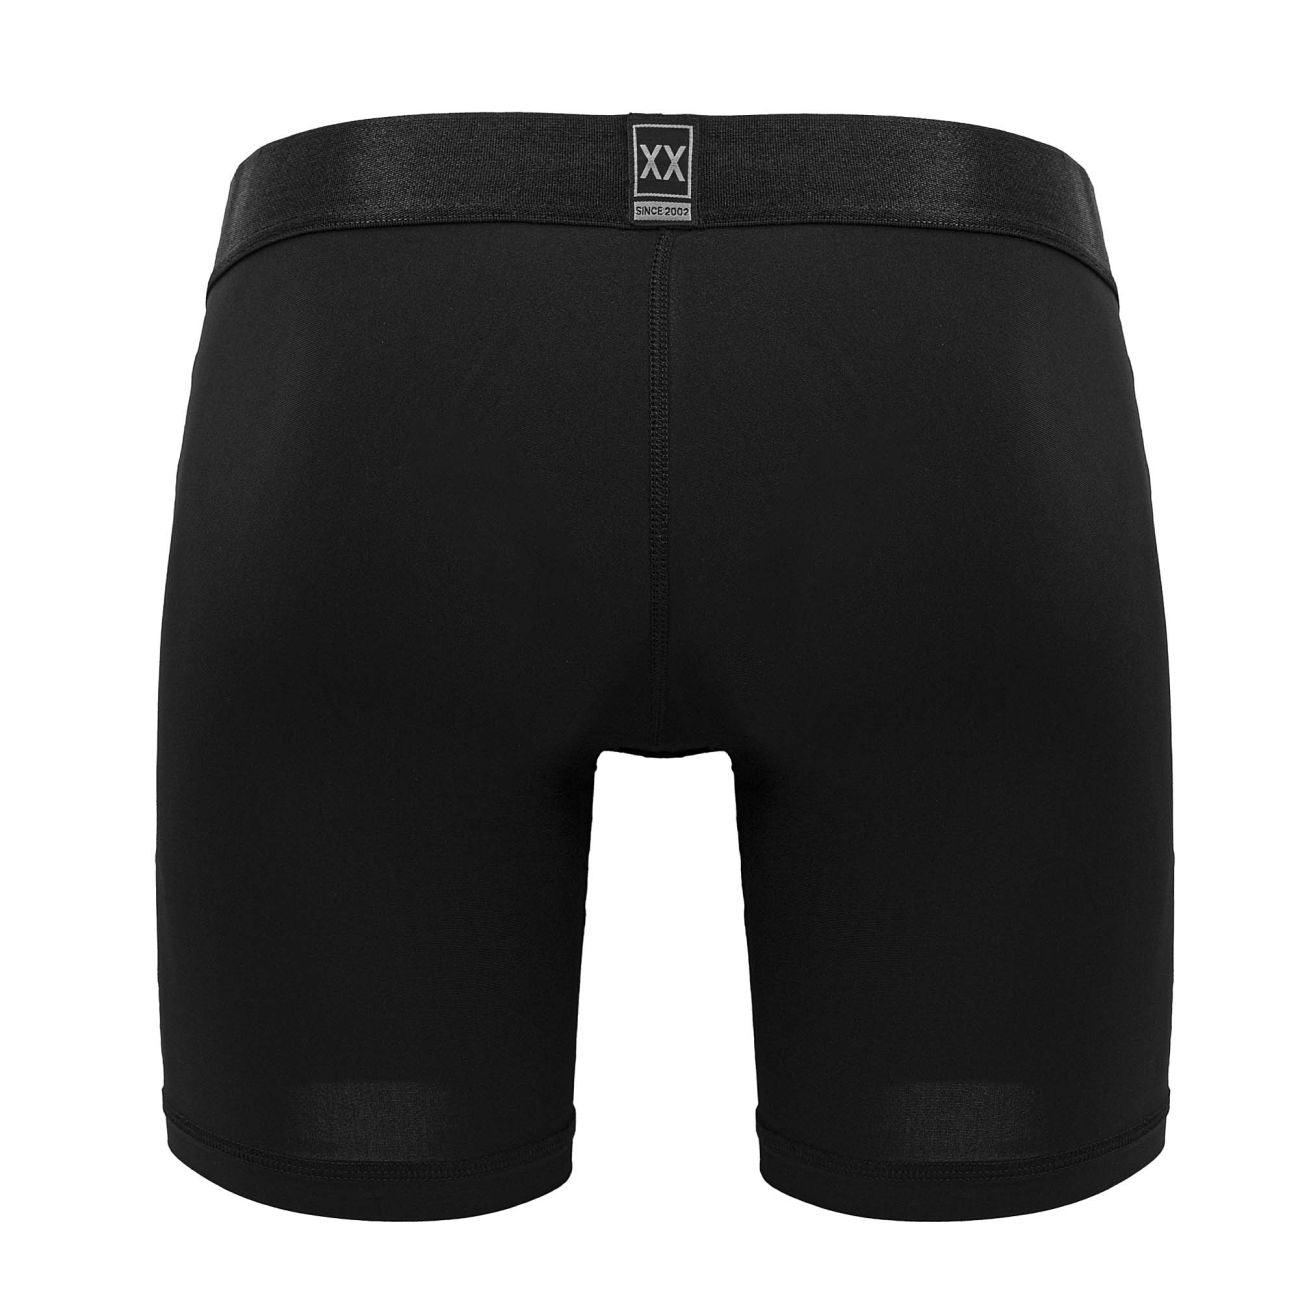 image of product,FEEL XX Boxer Briefs - SEXYEONE